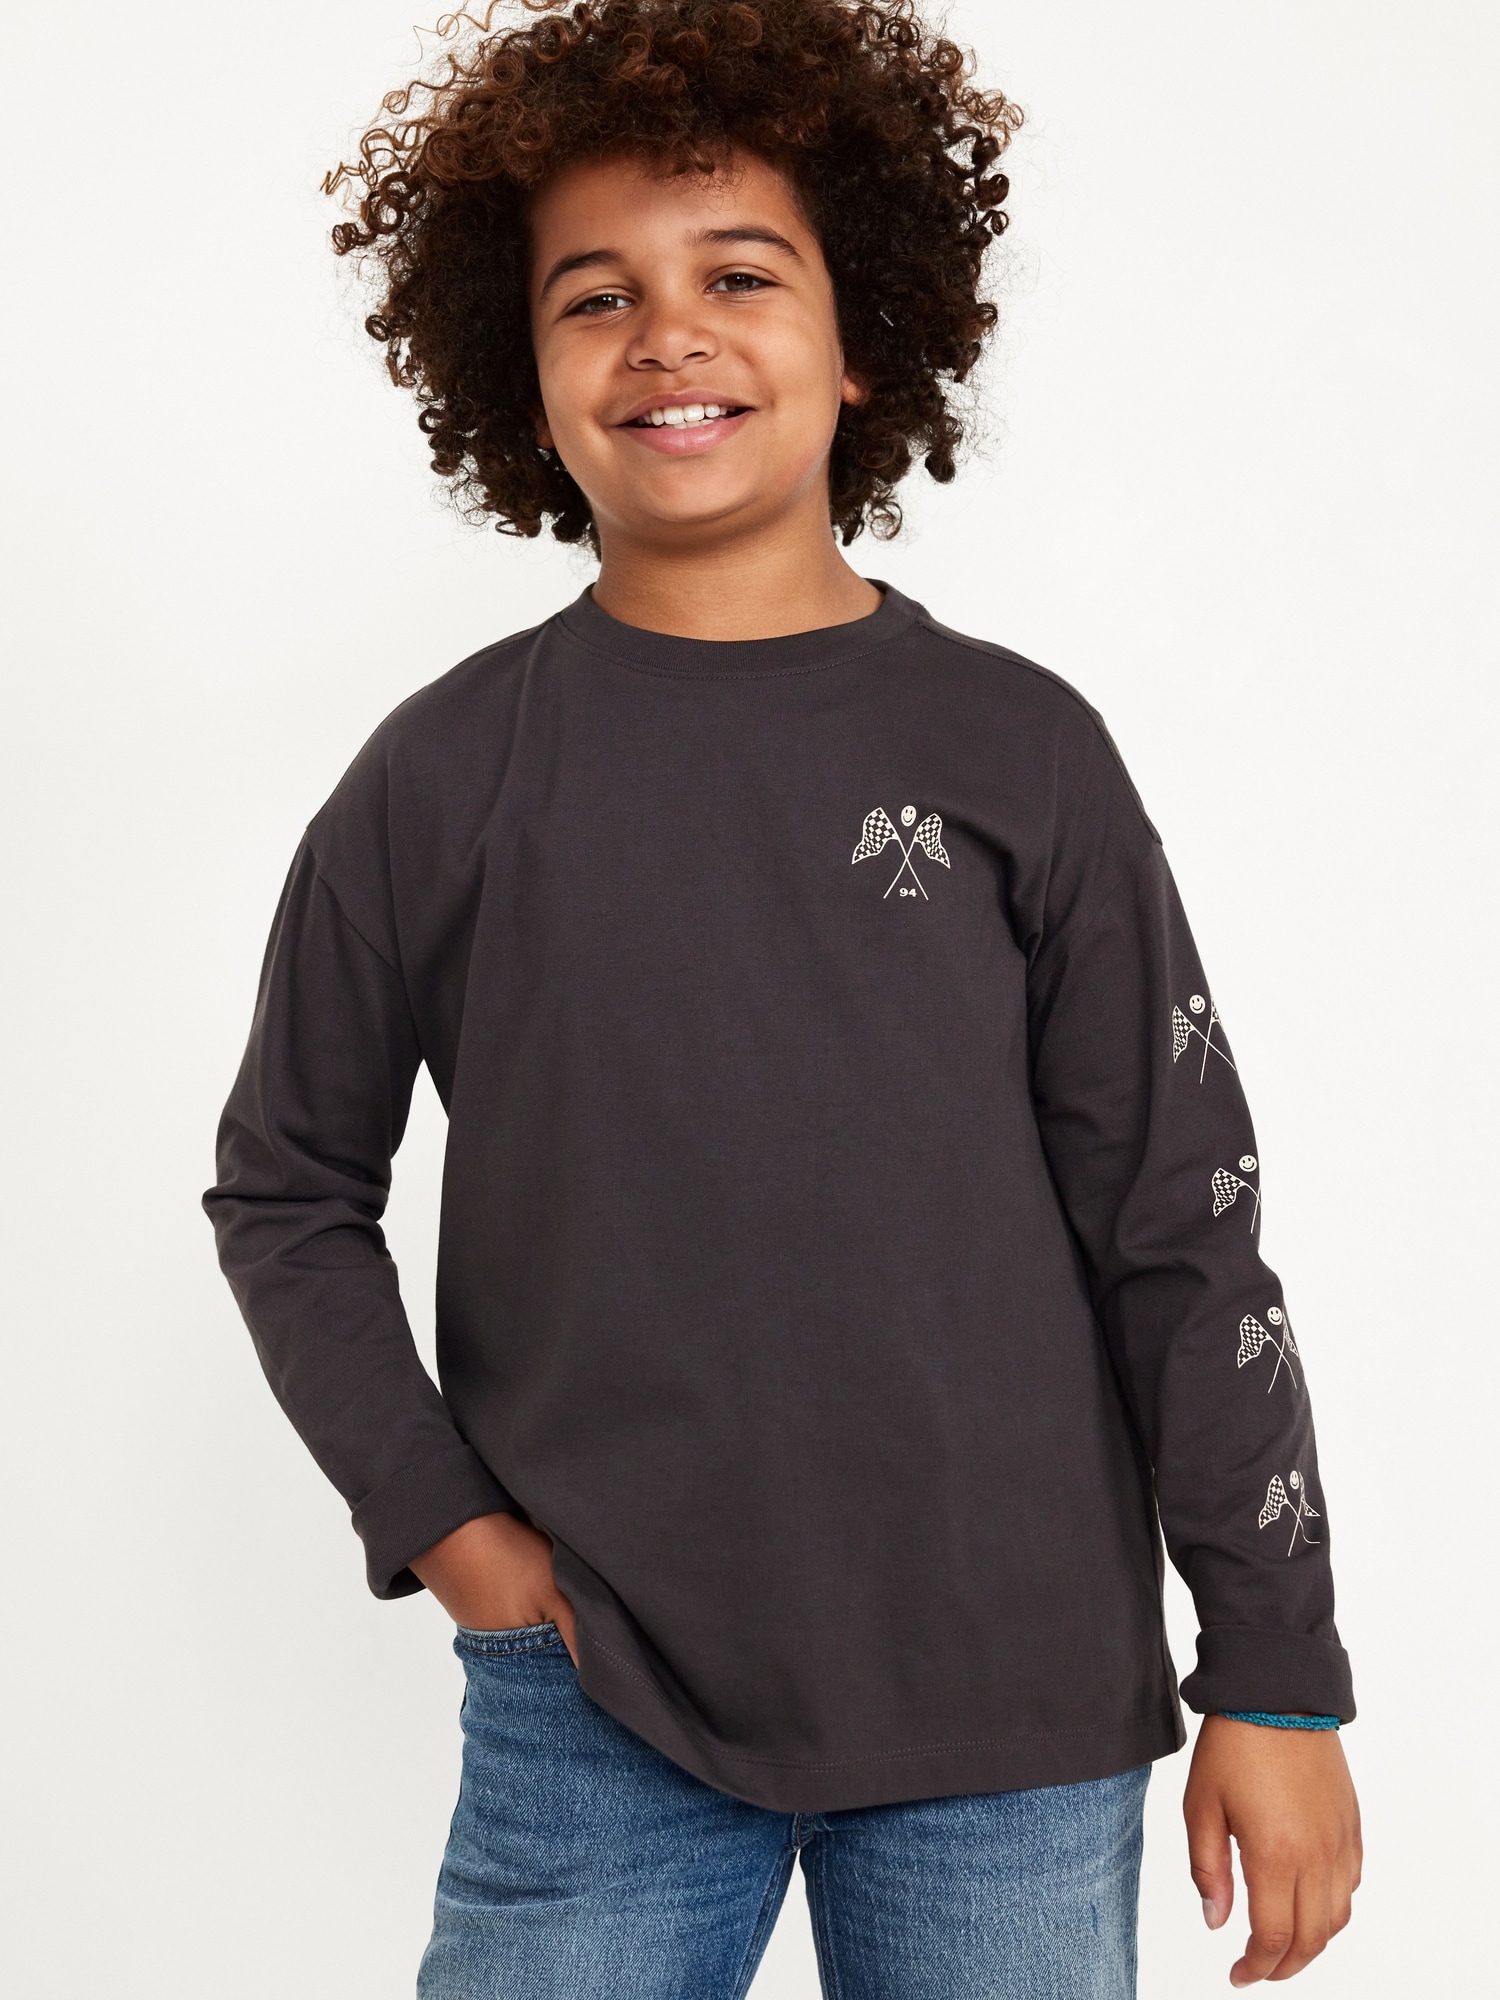 Oversized Graphic ong-Sleeve T-Shirt for Boys